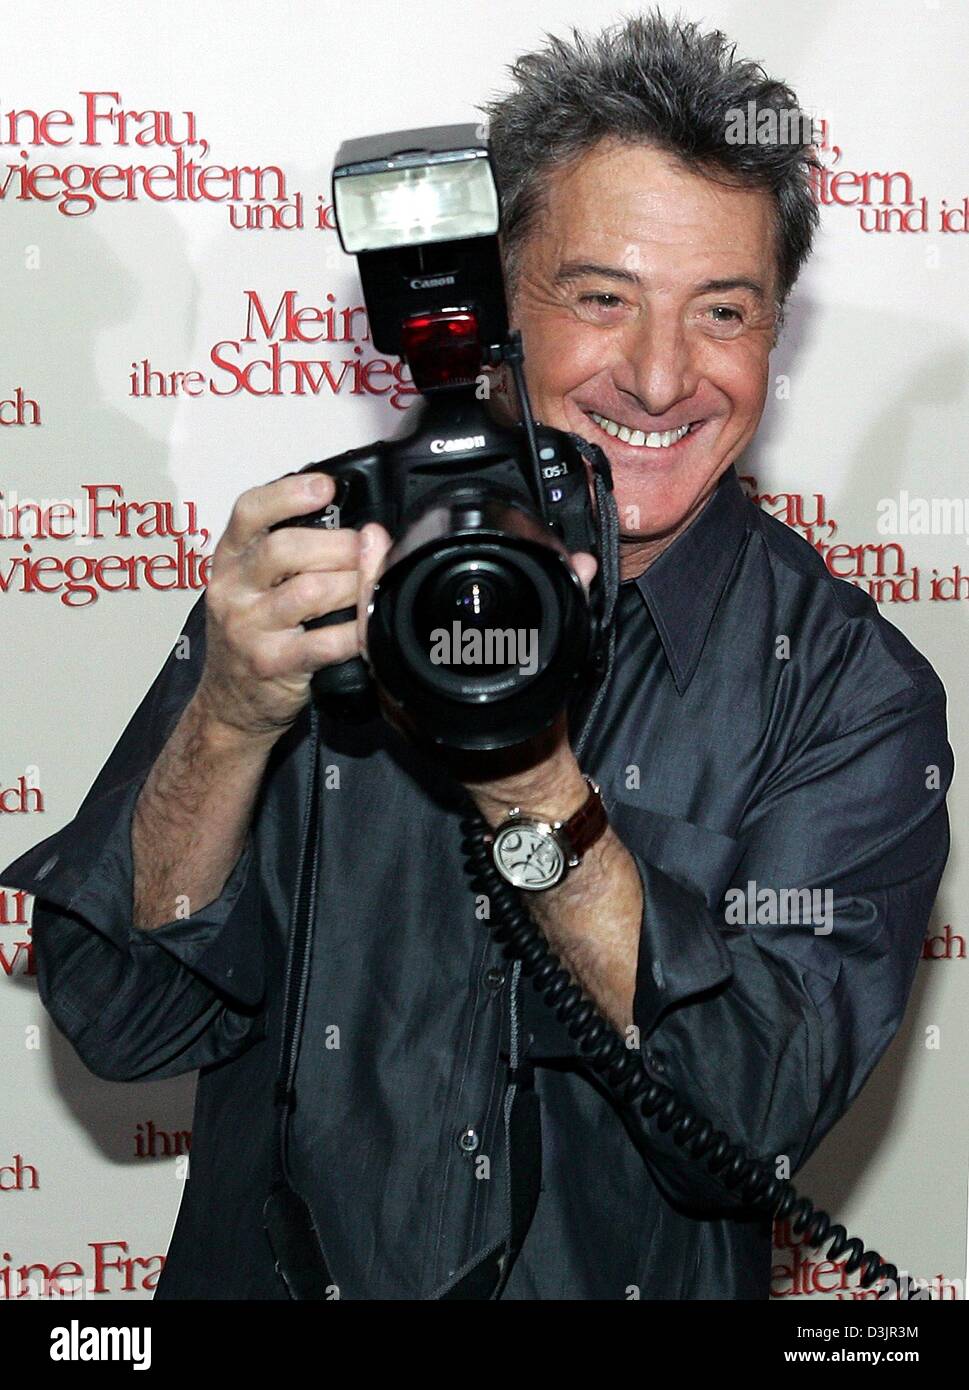 (dpa) - US actor Dustin Hoffman fools around with the camera of one of the female photographers during a photo call for the upcoming start of his film 'Meine Frau, ihre Schwiegereltern und ich' (original title: 'Meet the Fockers') at the Adlon hotel in Berlin, Germany, 1 February 2005. Stock Photo